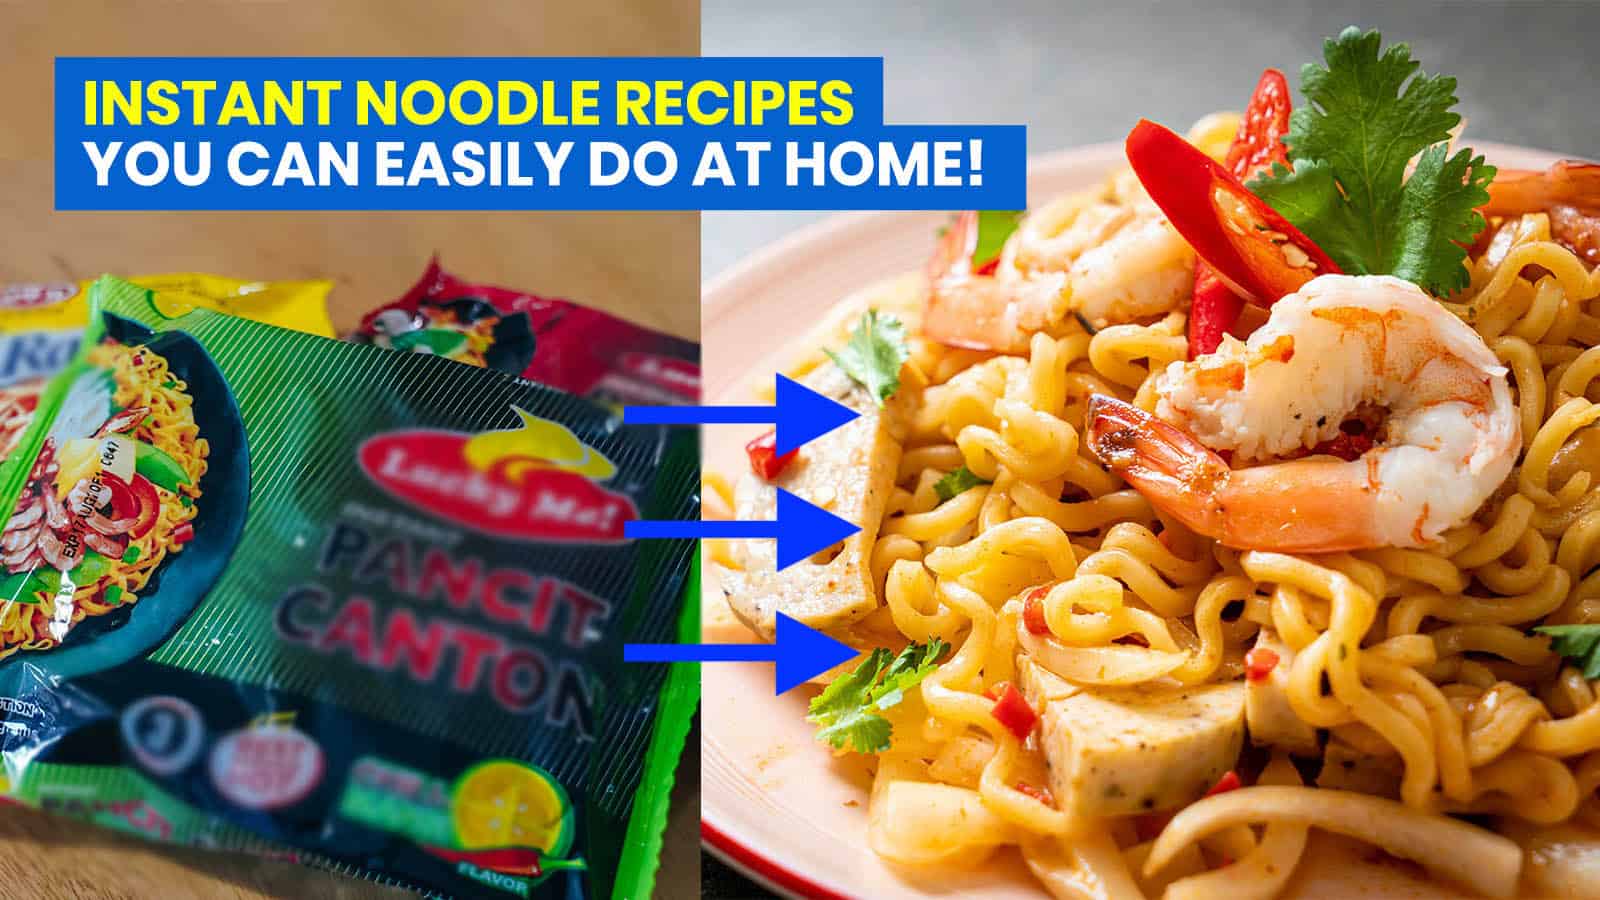 12 INSTANT NOODLE RECIPES that You Can Easily Do at Home